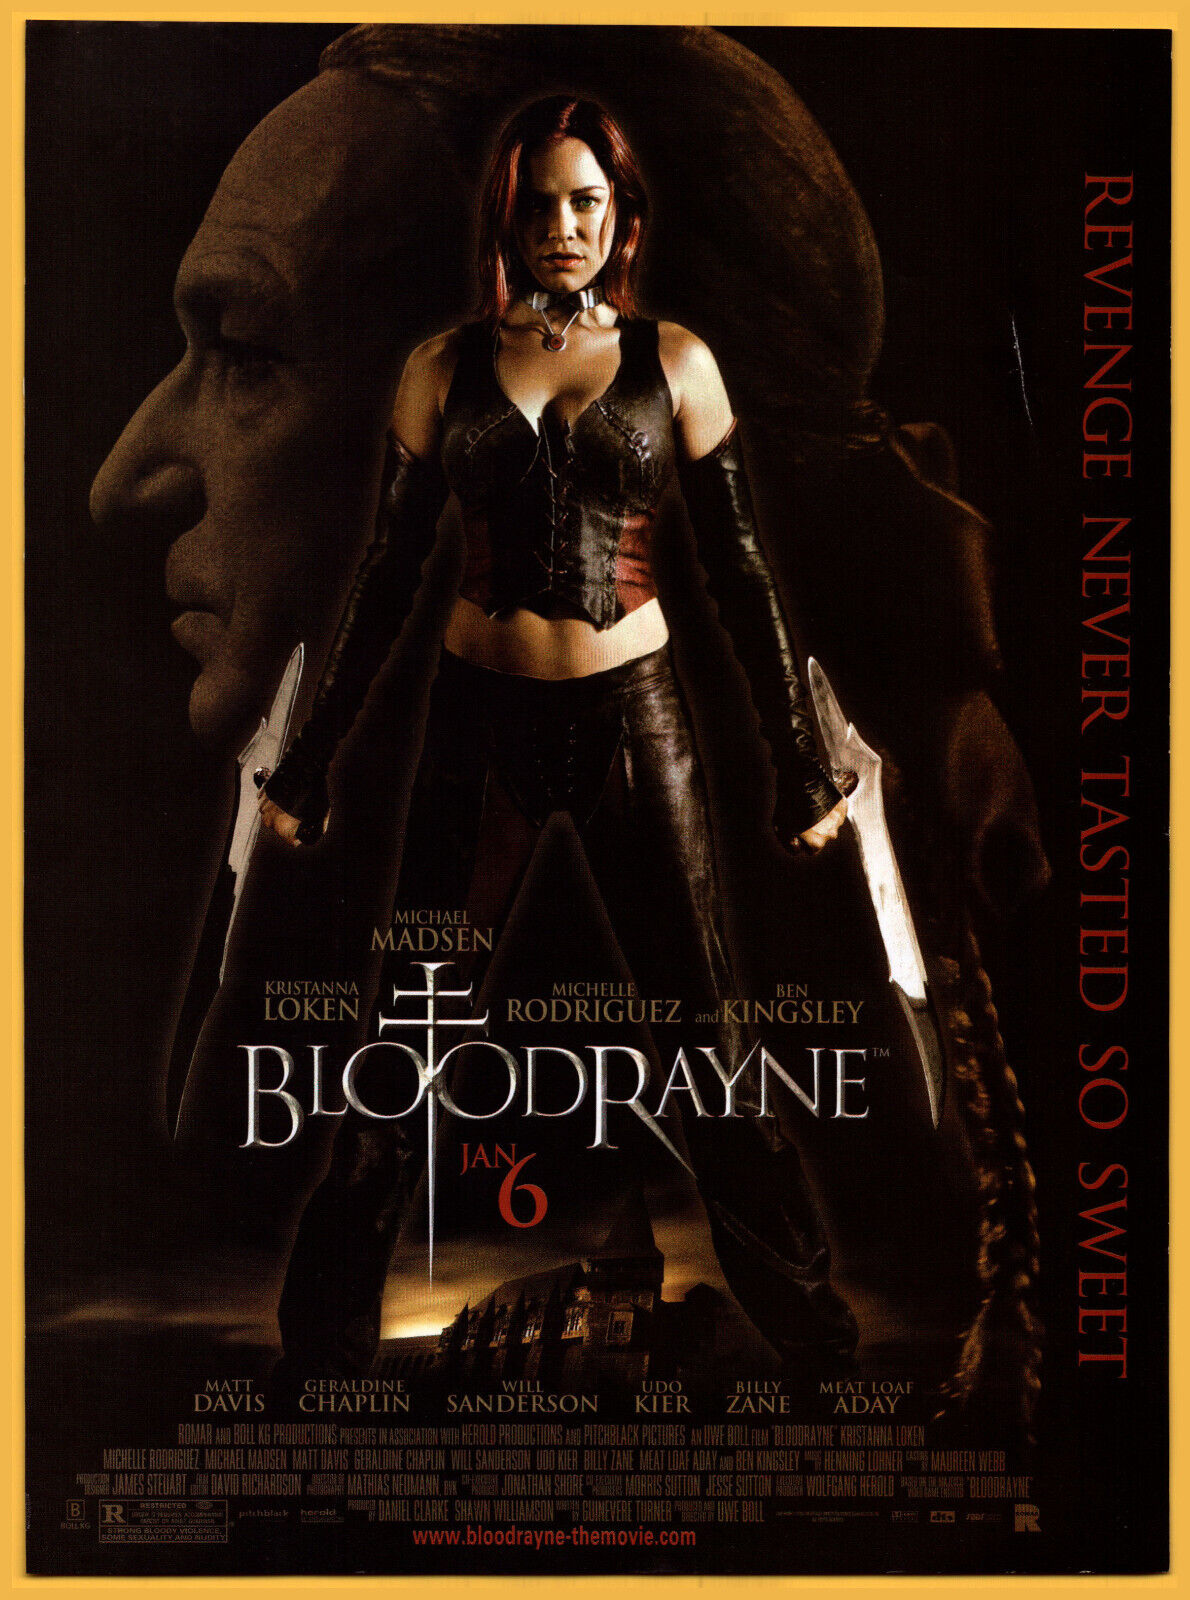 Bloodrayne the Live Action Movie - Game Print Ad / Poster Promo Art 2006